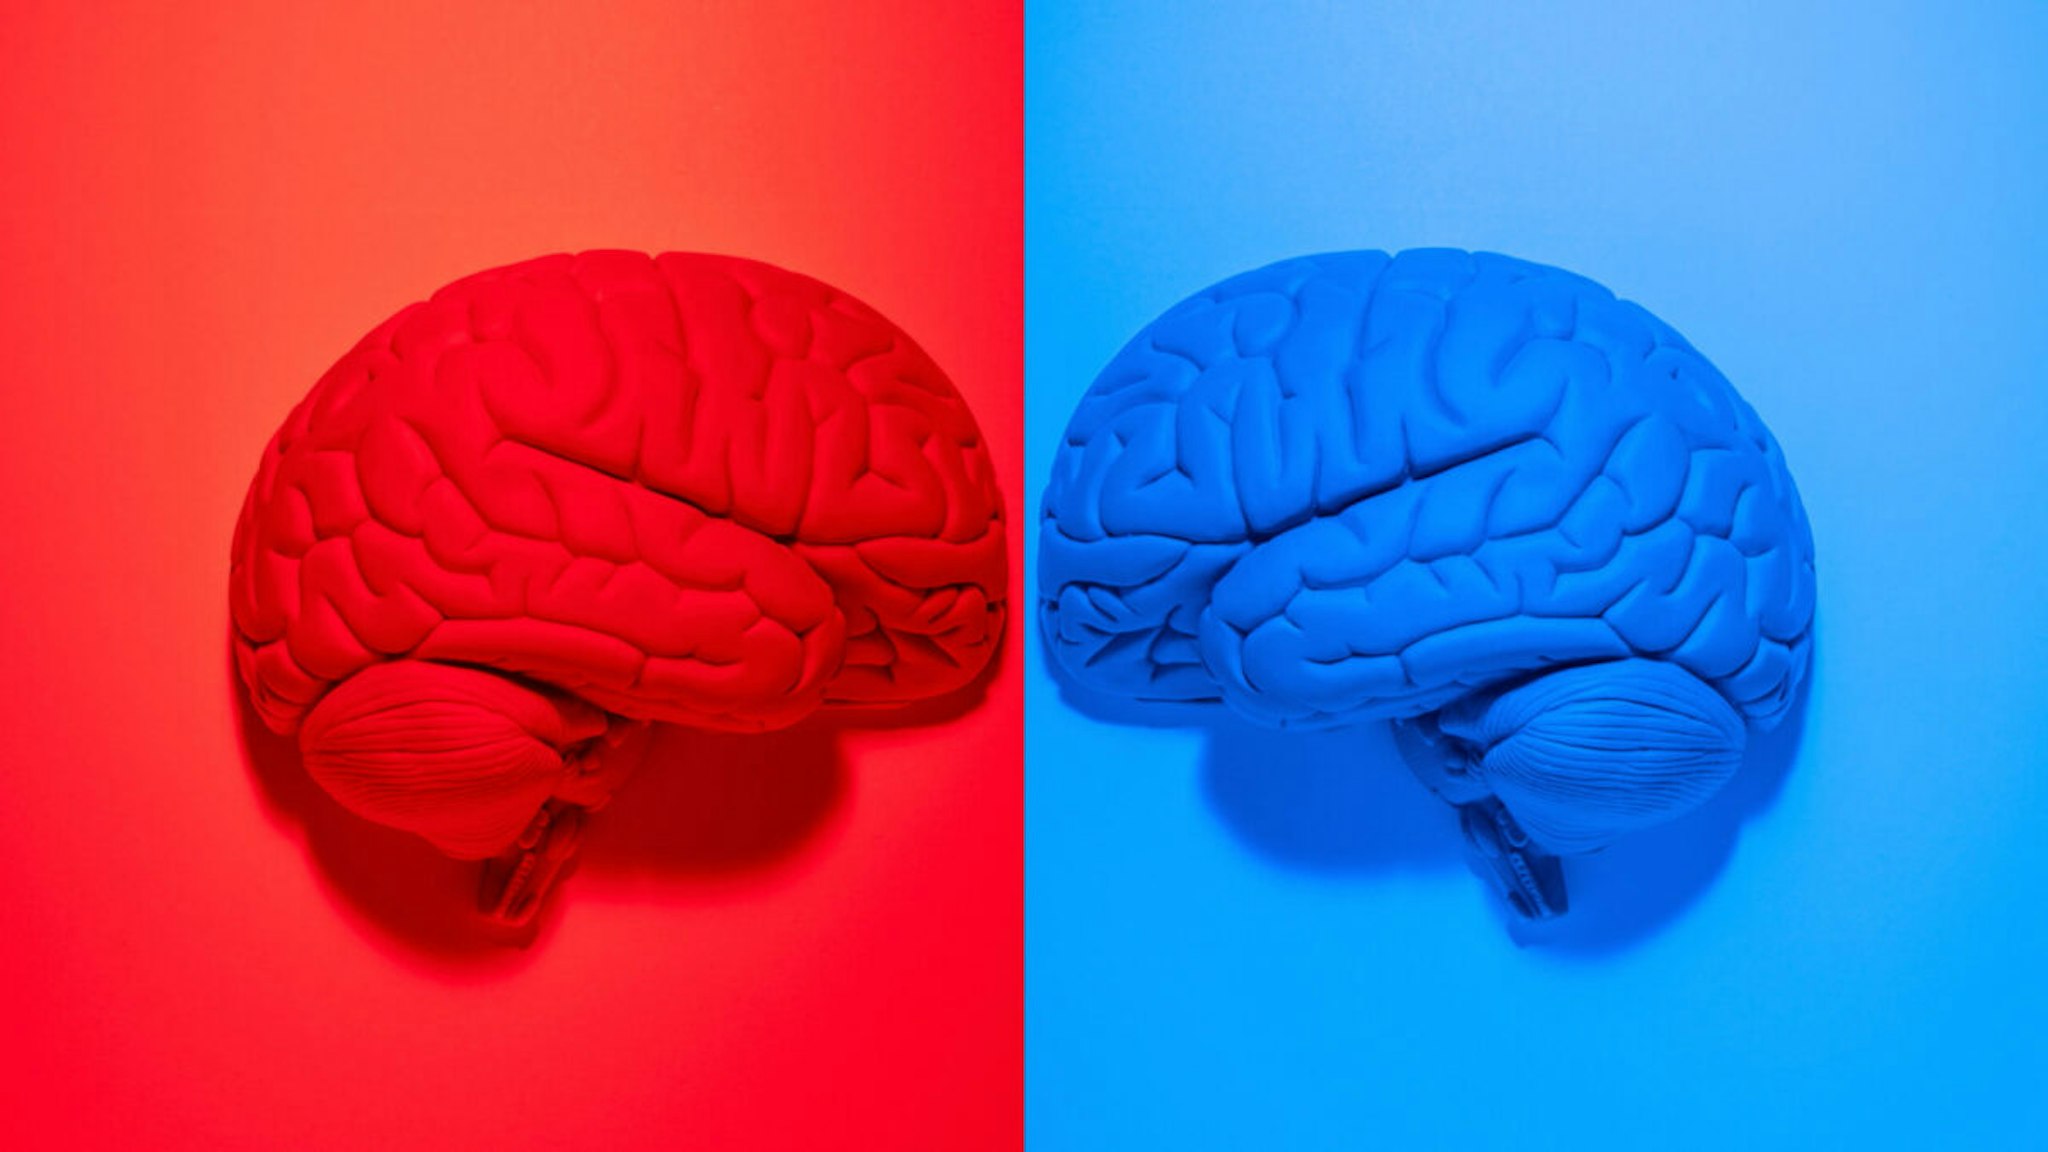 Vibrantly colored red and blue anatomical human brain models facing each other on red and blue backgrounds.